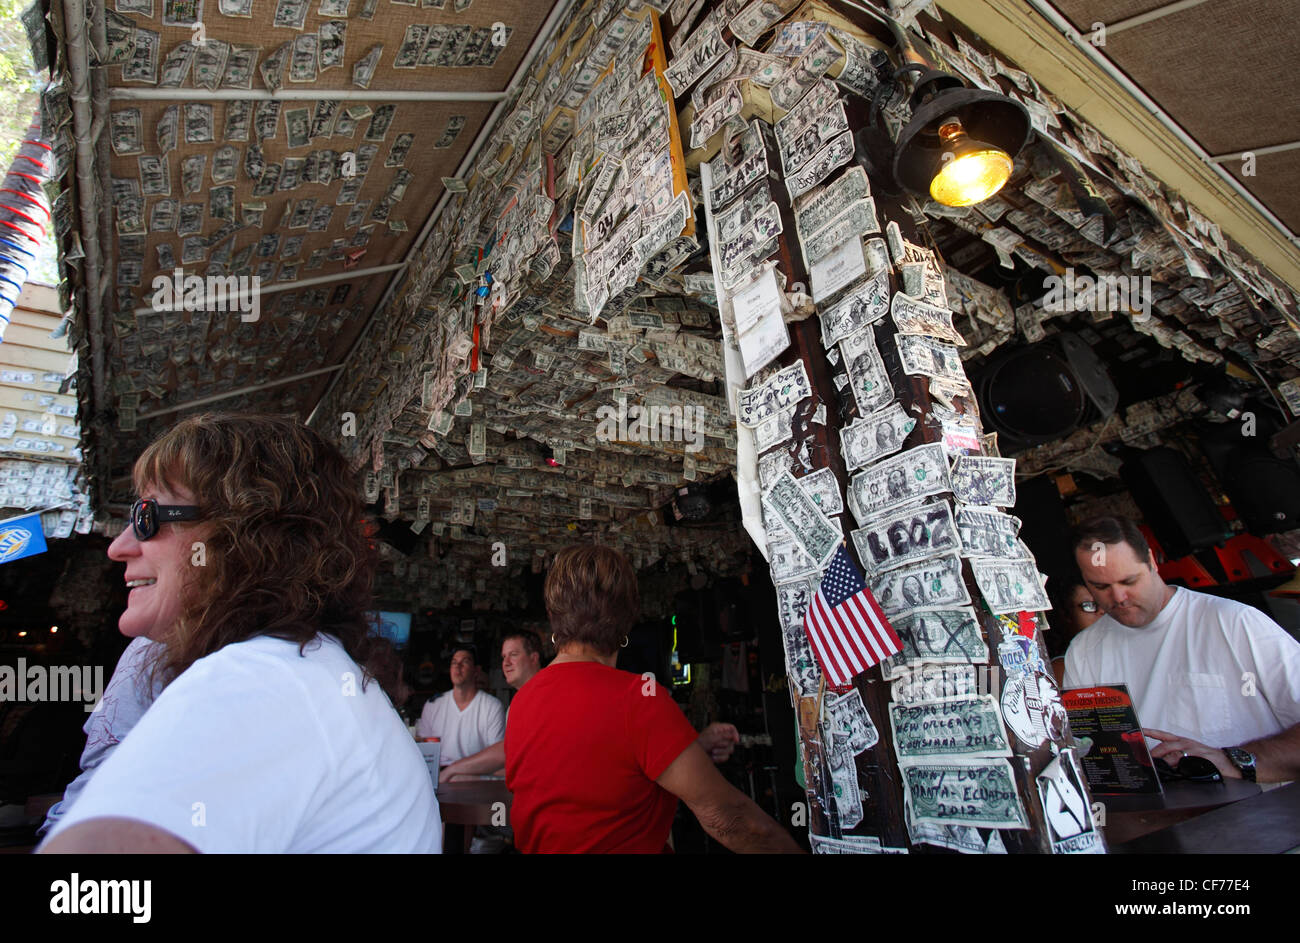 dollar bills stapled to the walls and ceiling by patron's of Willie T's bar, Key West, Florida Stock Photo